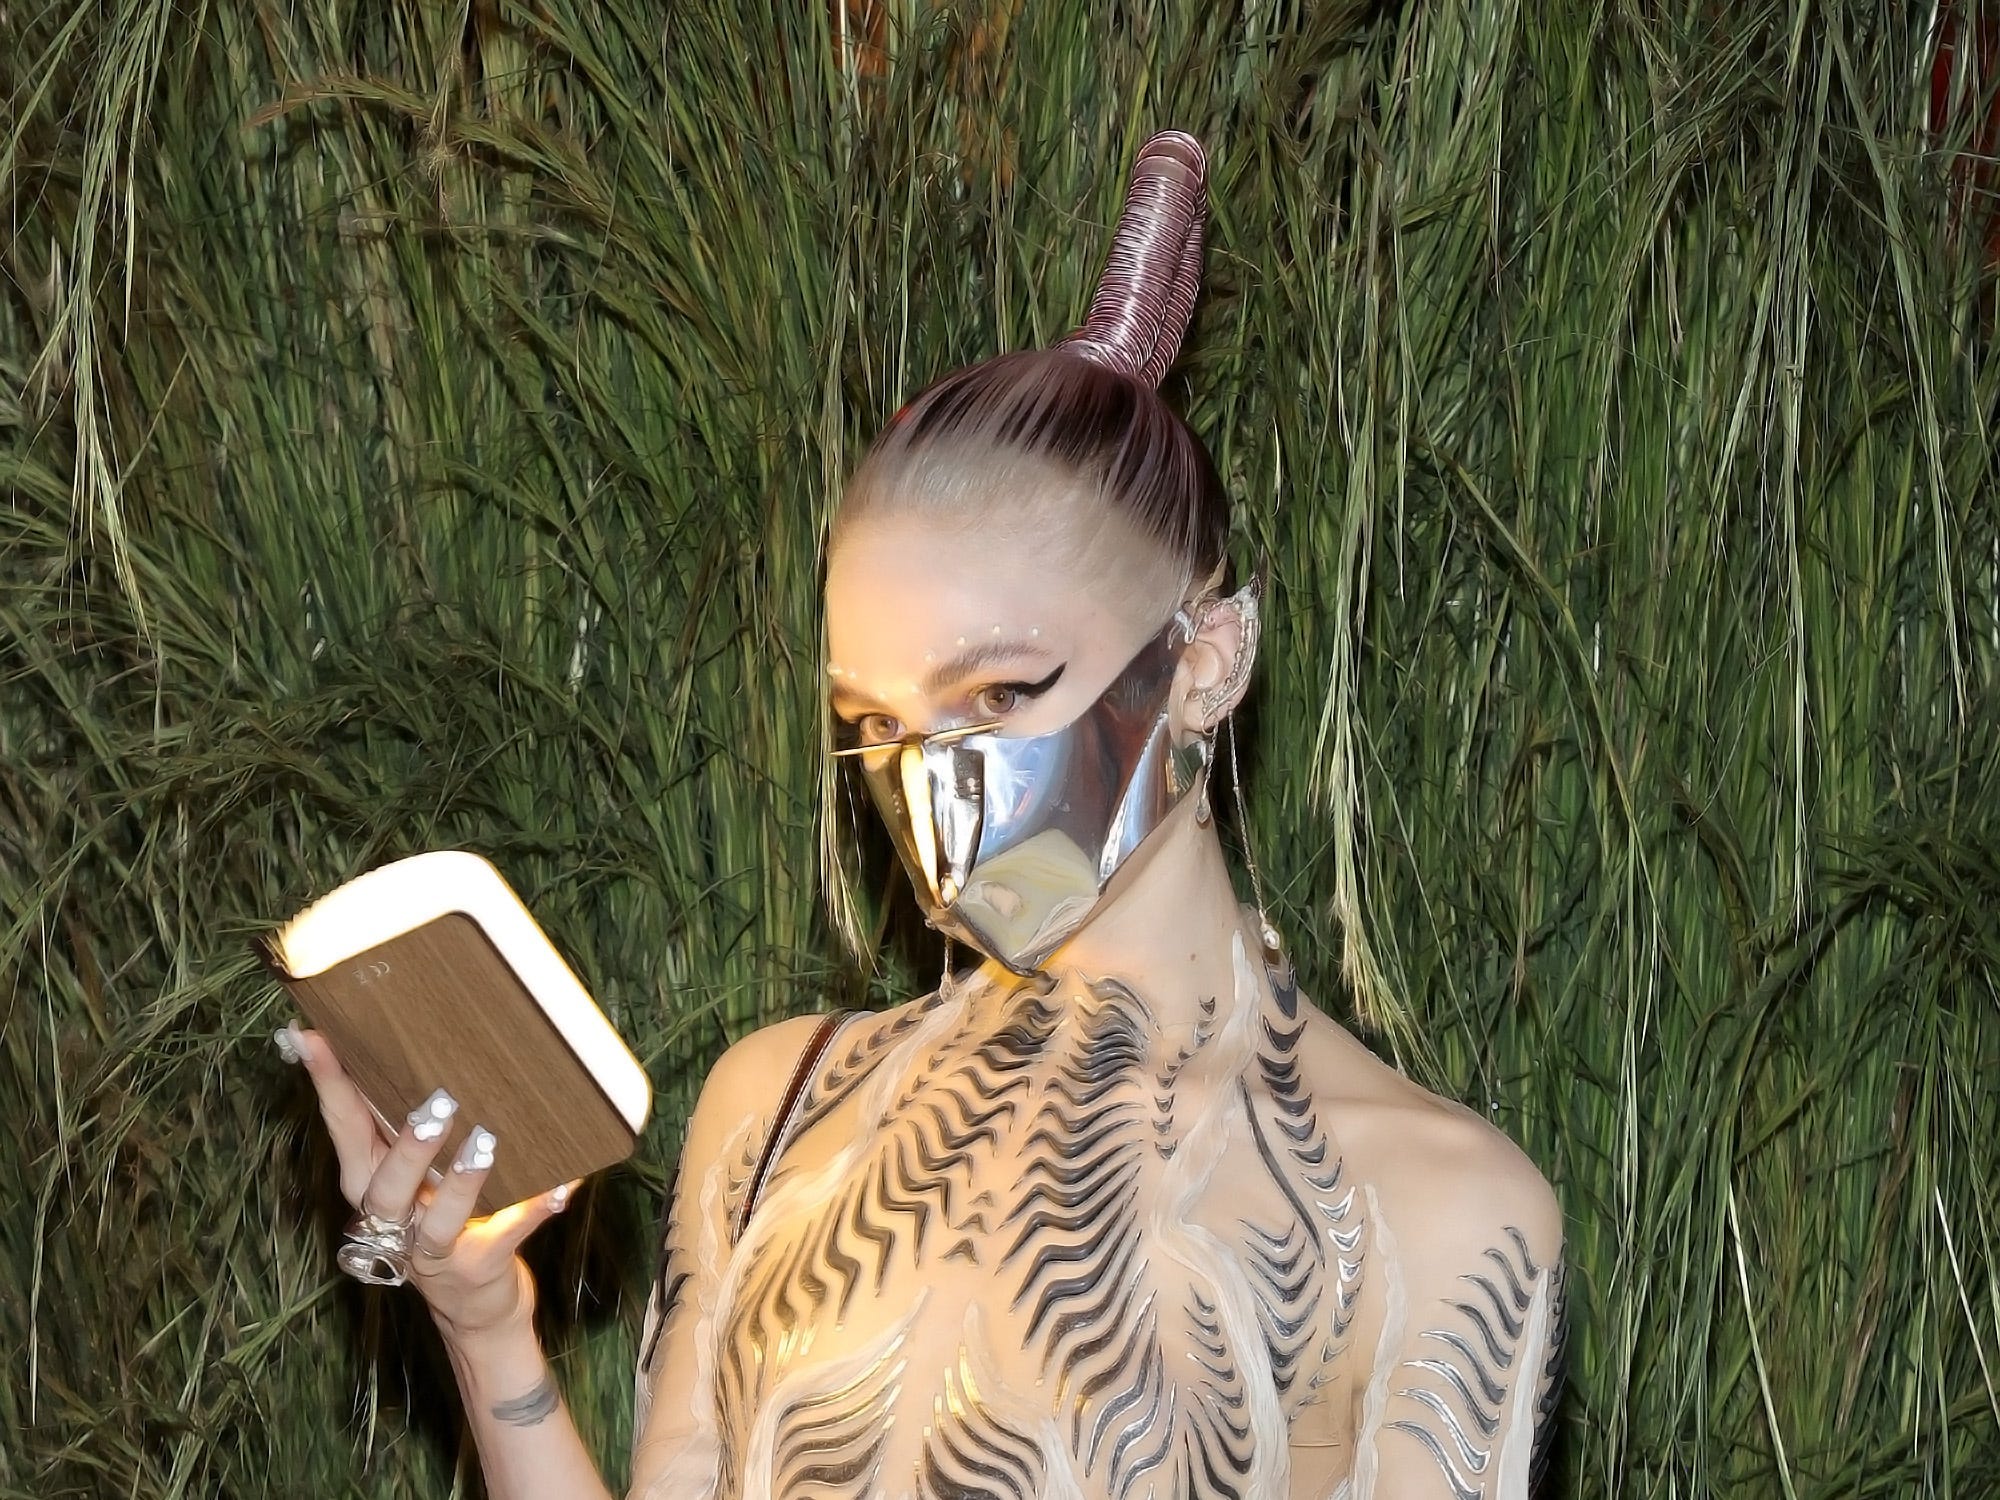 A picture of Grimes at the 2021 Met Gala